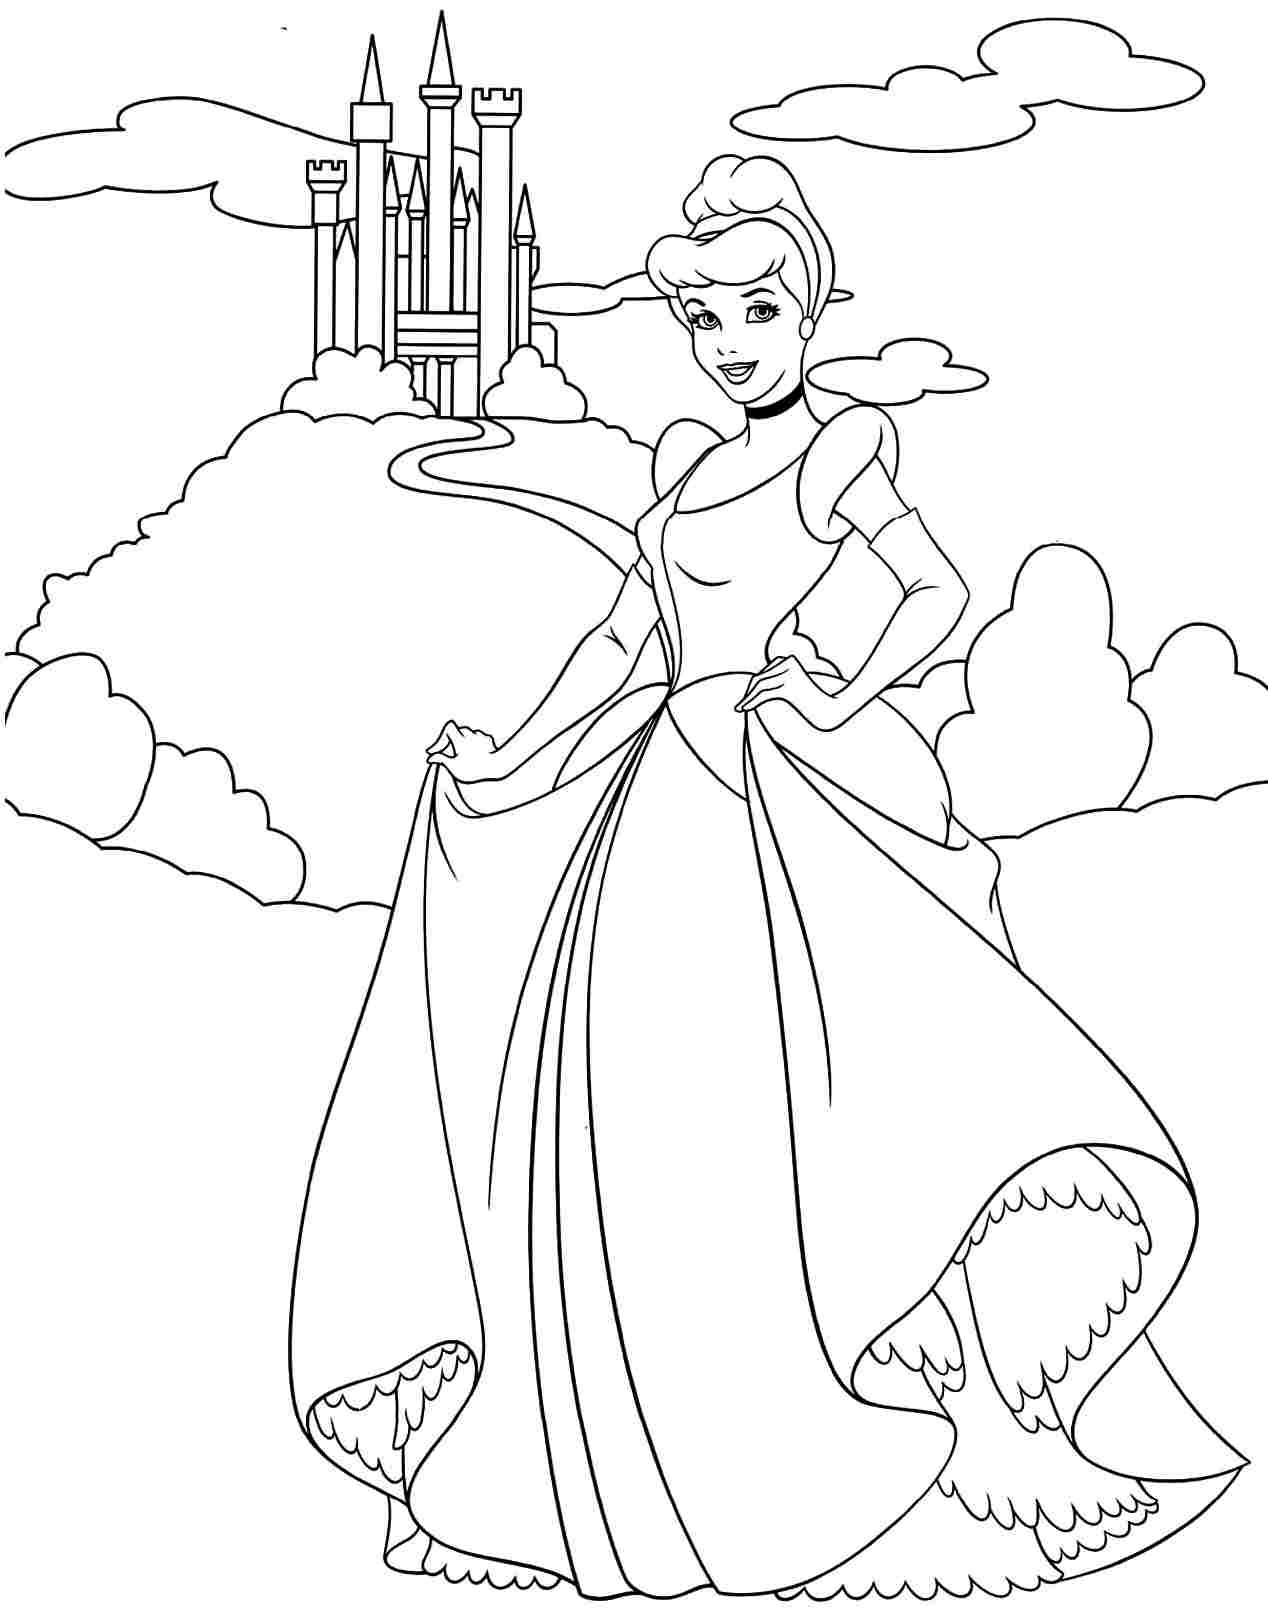 Cinderella Coloring Pages at GetColorings.com | Free printable